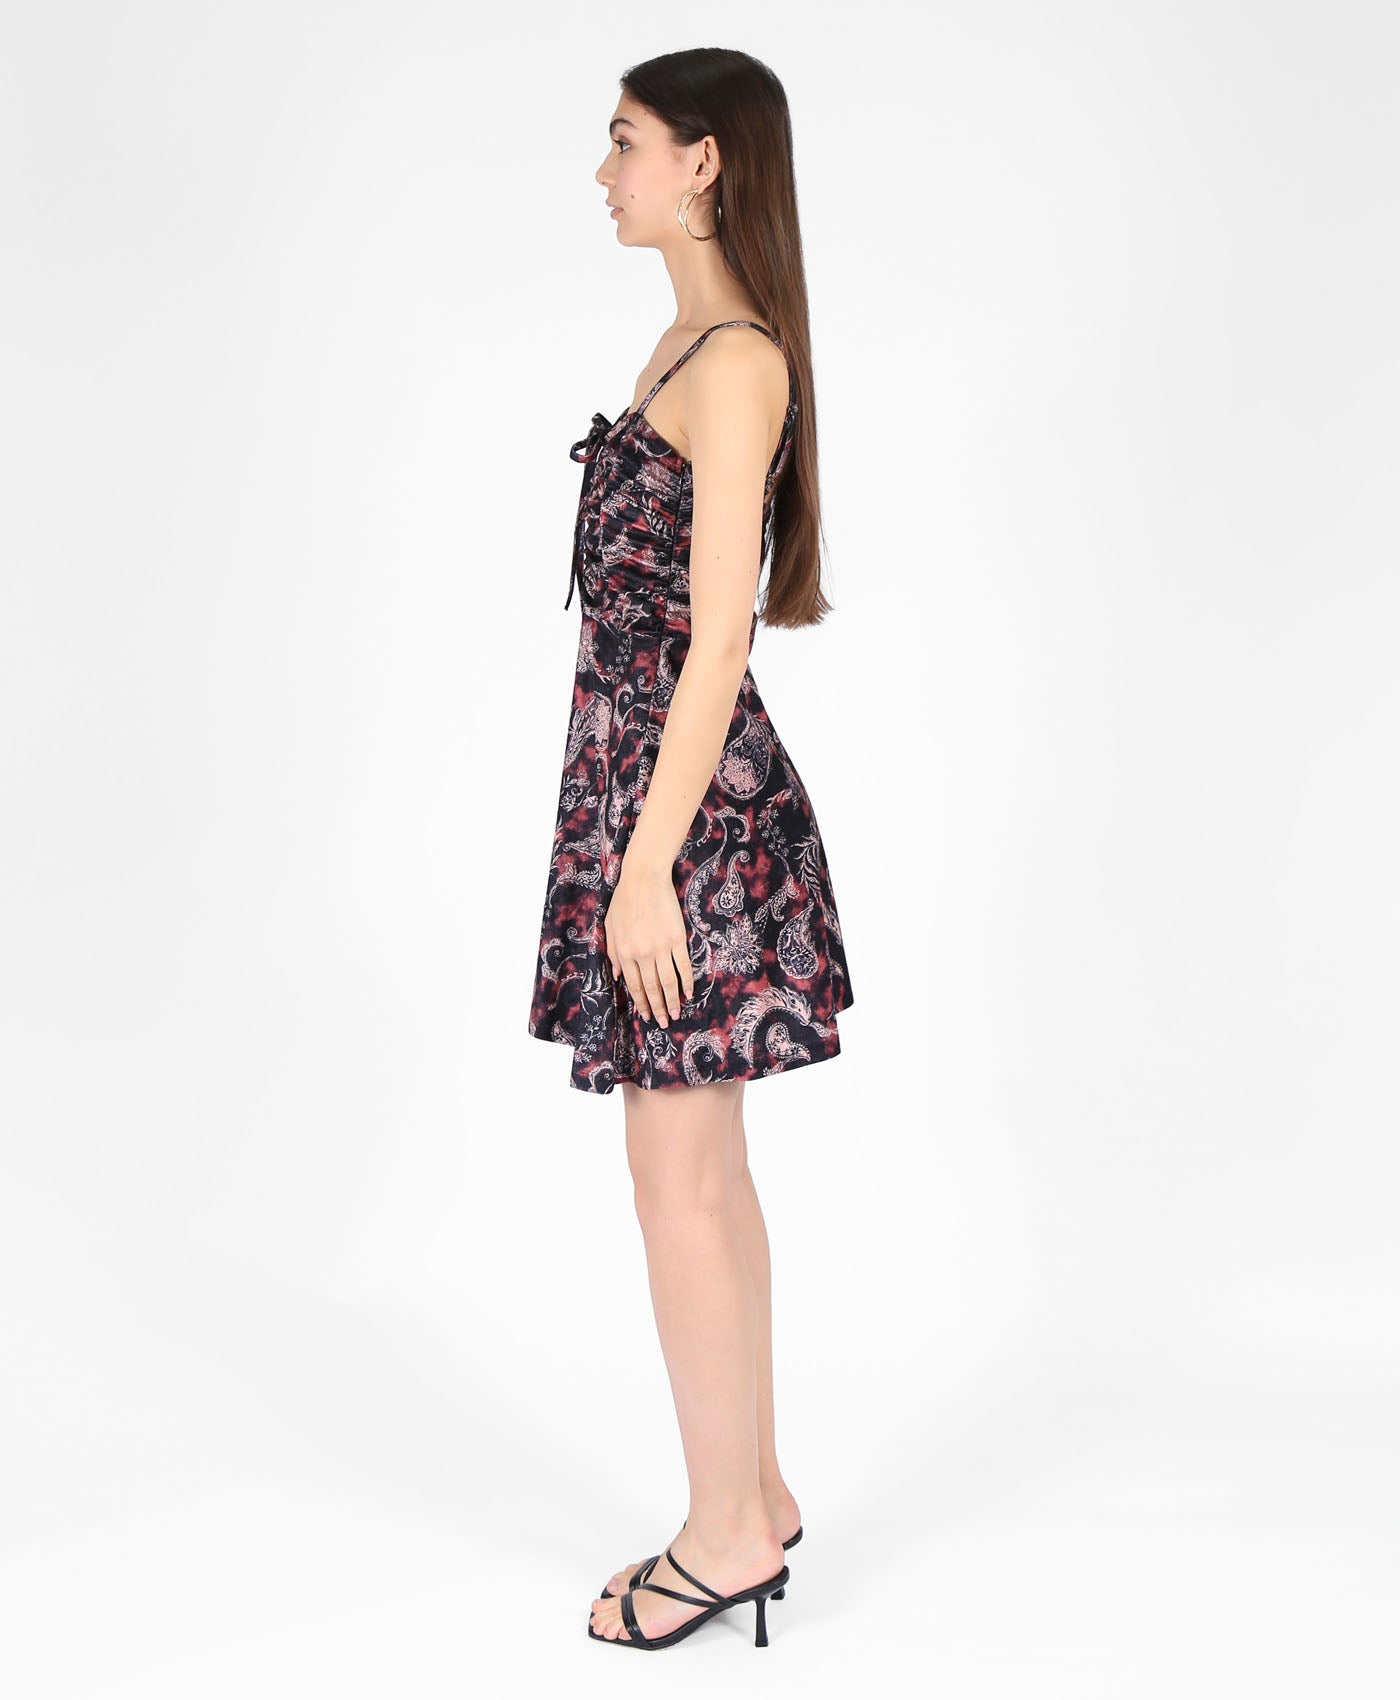 Ruched Mini Dress In Black Paisley